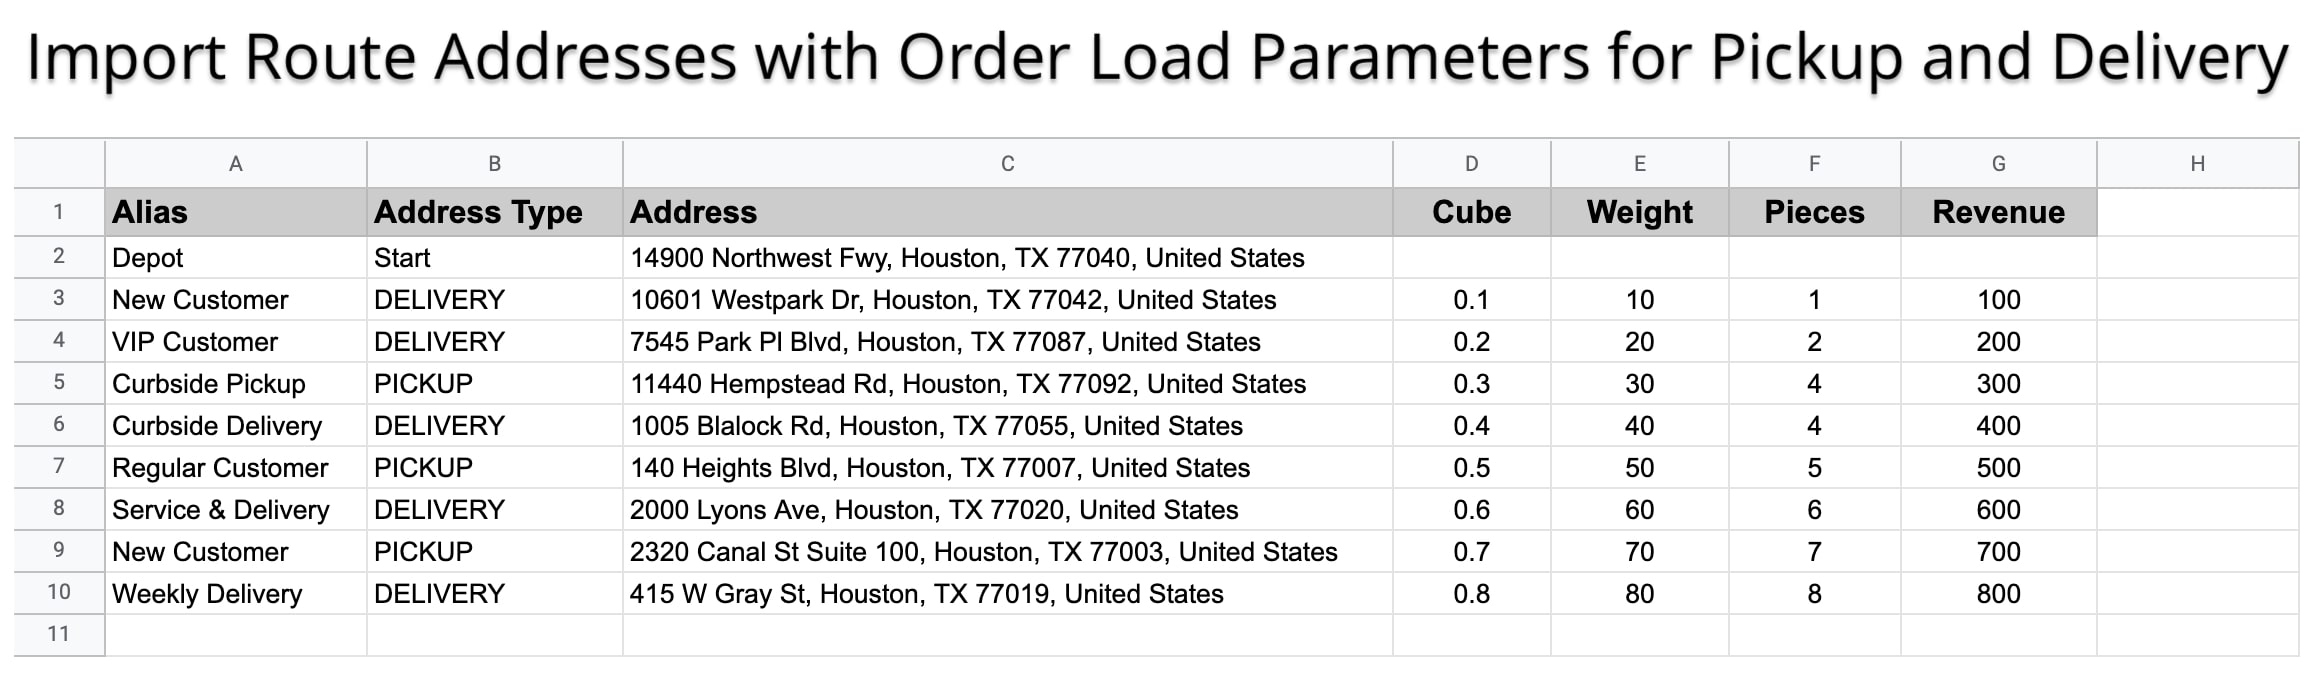 Add route addresses with such order load parameters as weight, cubic volume, and number of items.